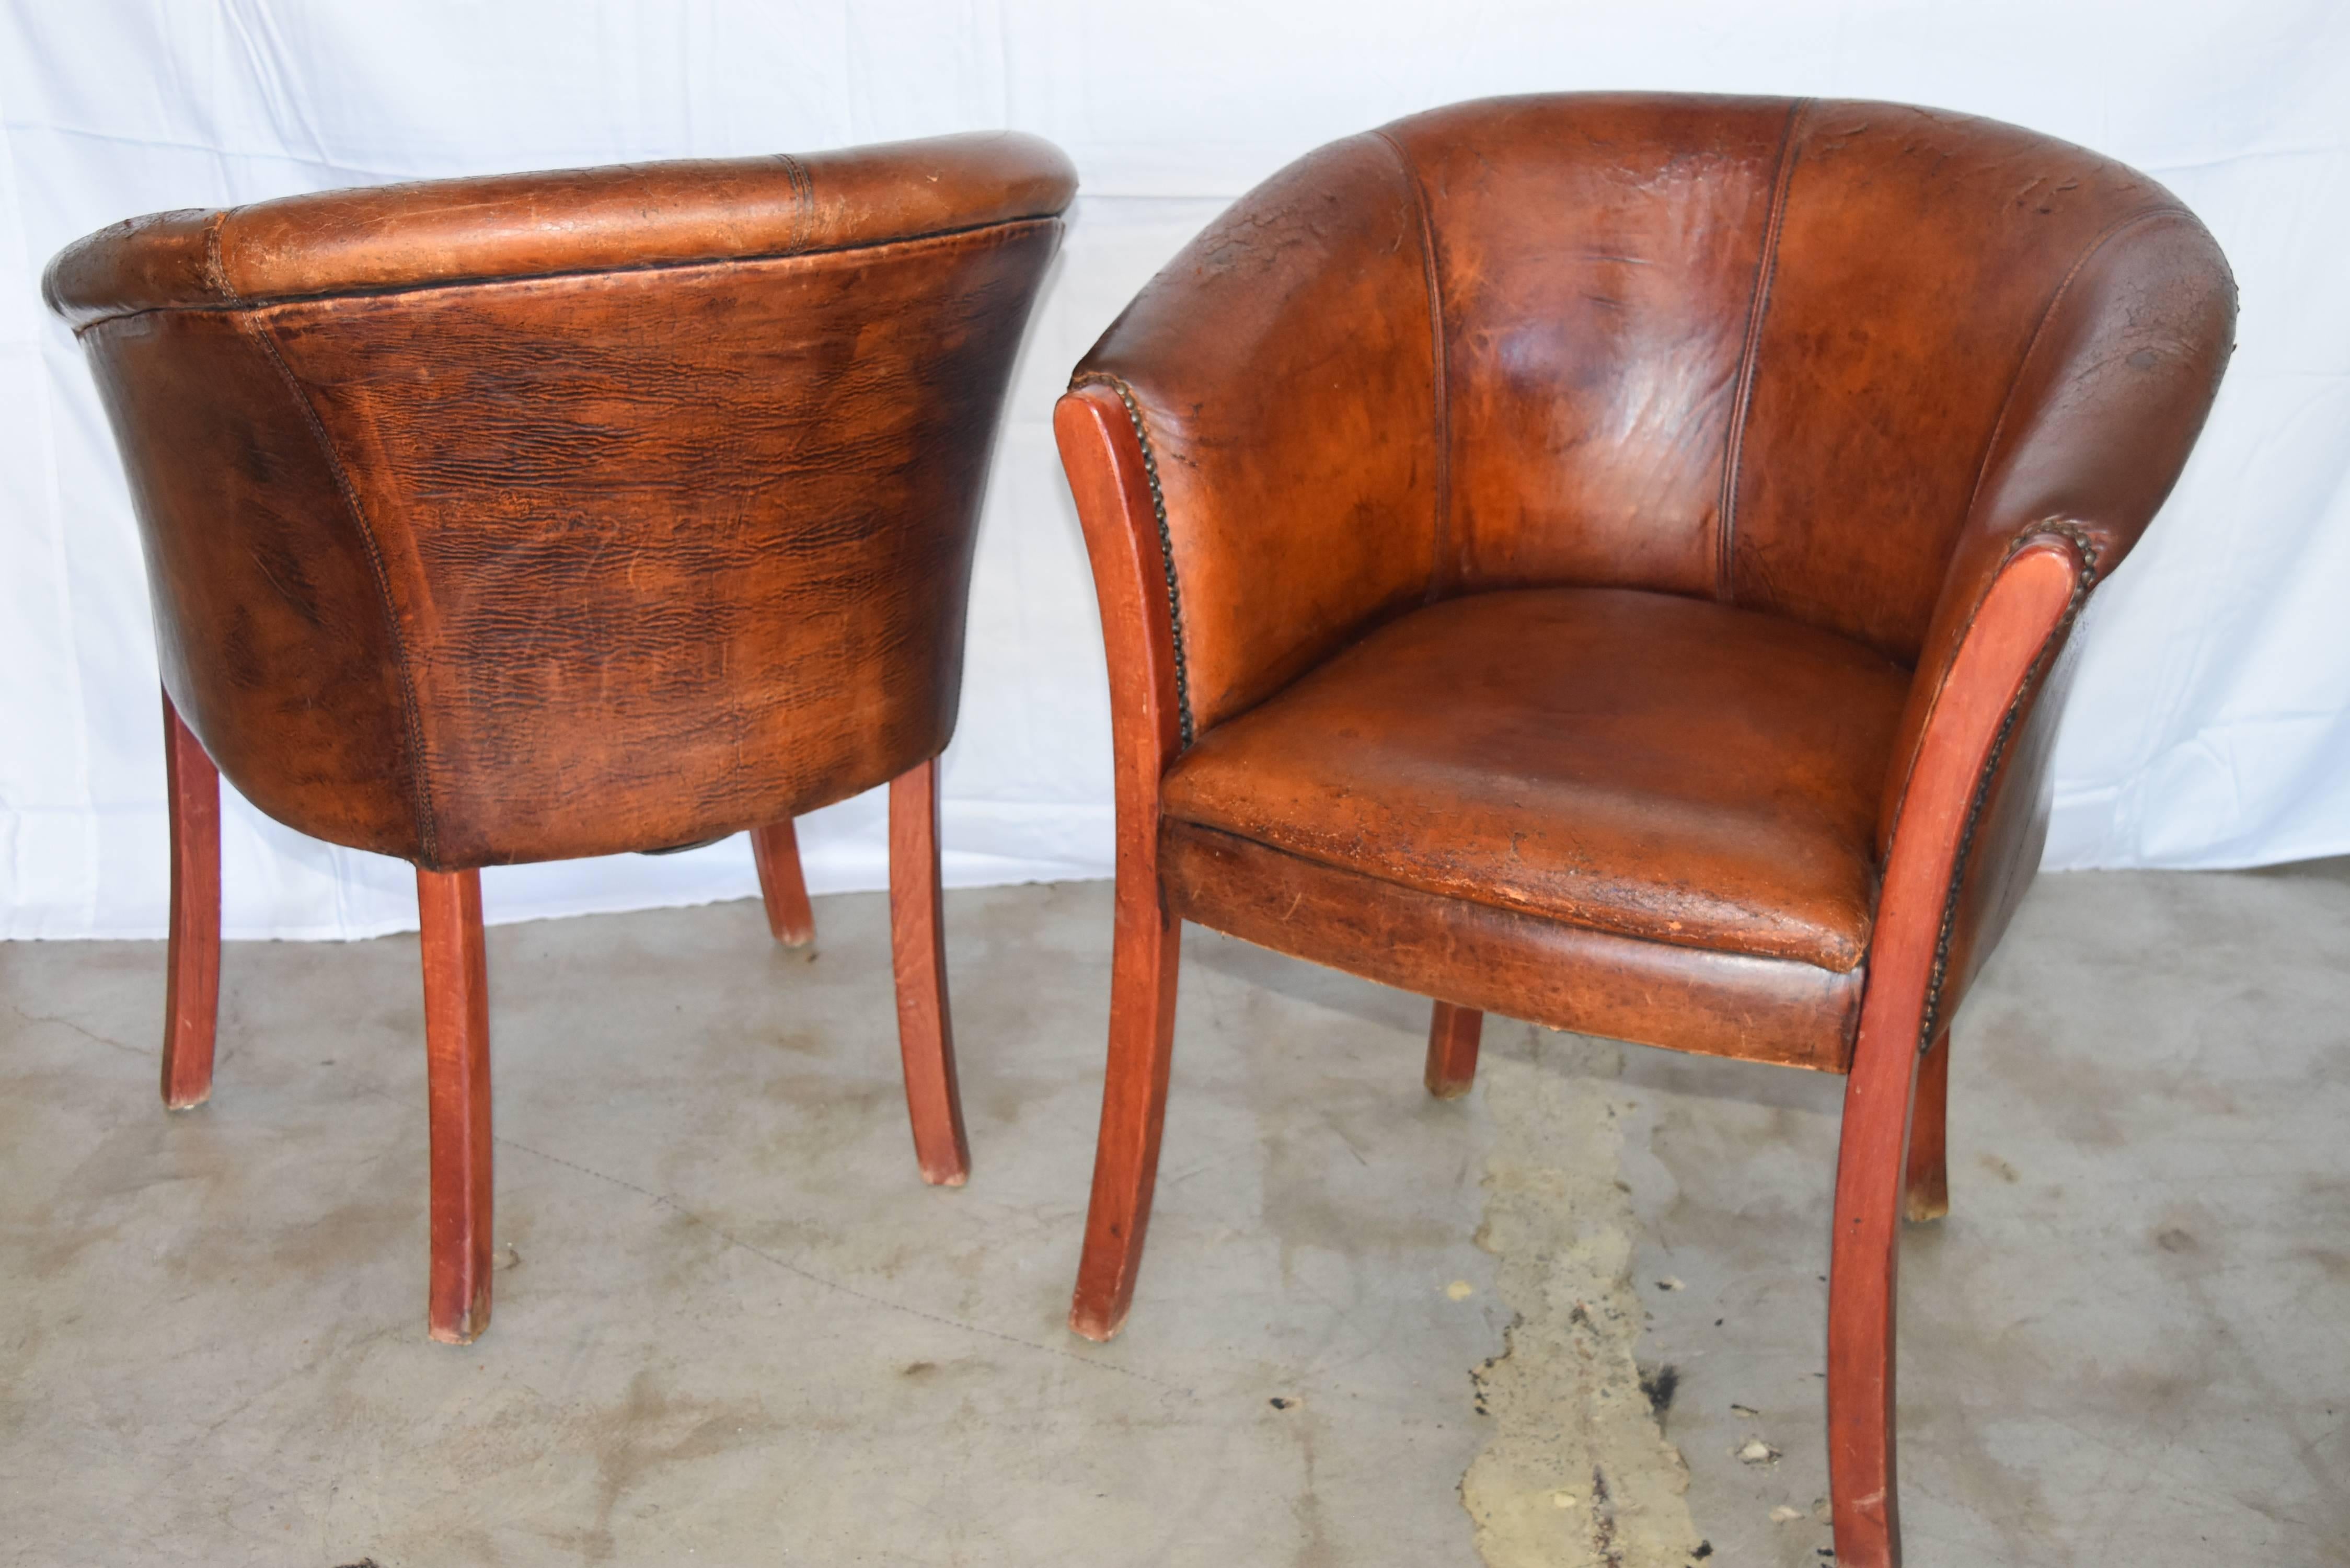 These adorable club chairs from Europe have that really rubbed and well used look like they've been smoked in for 100 years. The color of the leather is a beautiful cognac color and really in pretty good condition for their age. One does have about